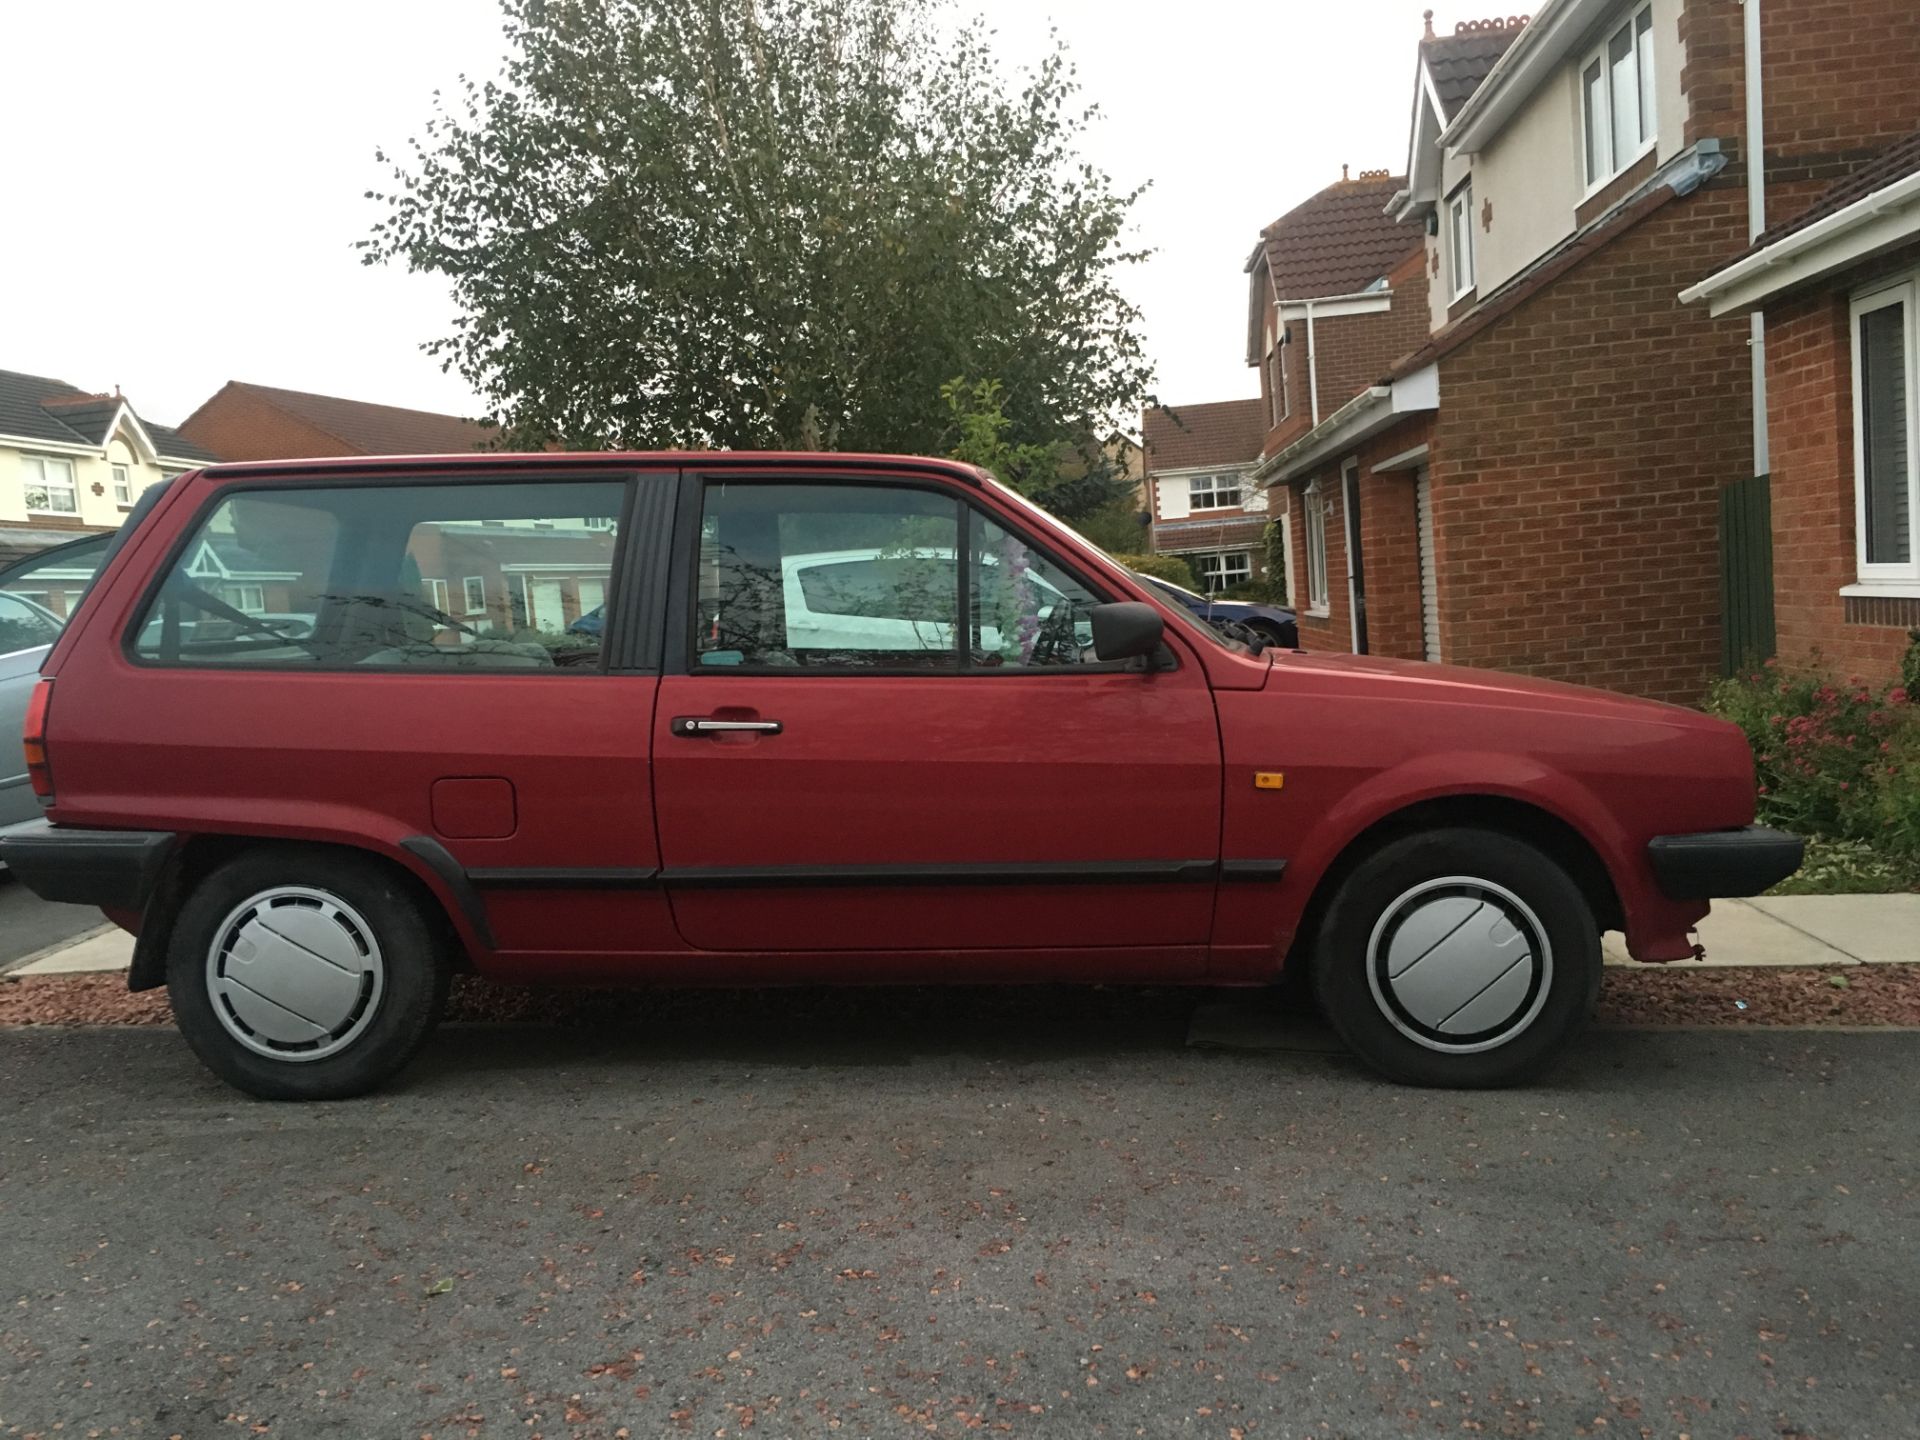 1989 1.0 VW Polo Mk2 Breadvan 81K Miles No Mot  Completely Original From Factory - Image 3 of 15